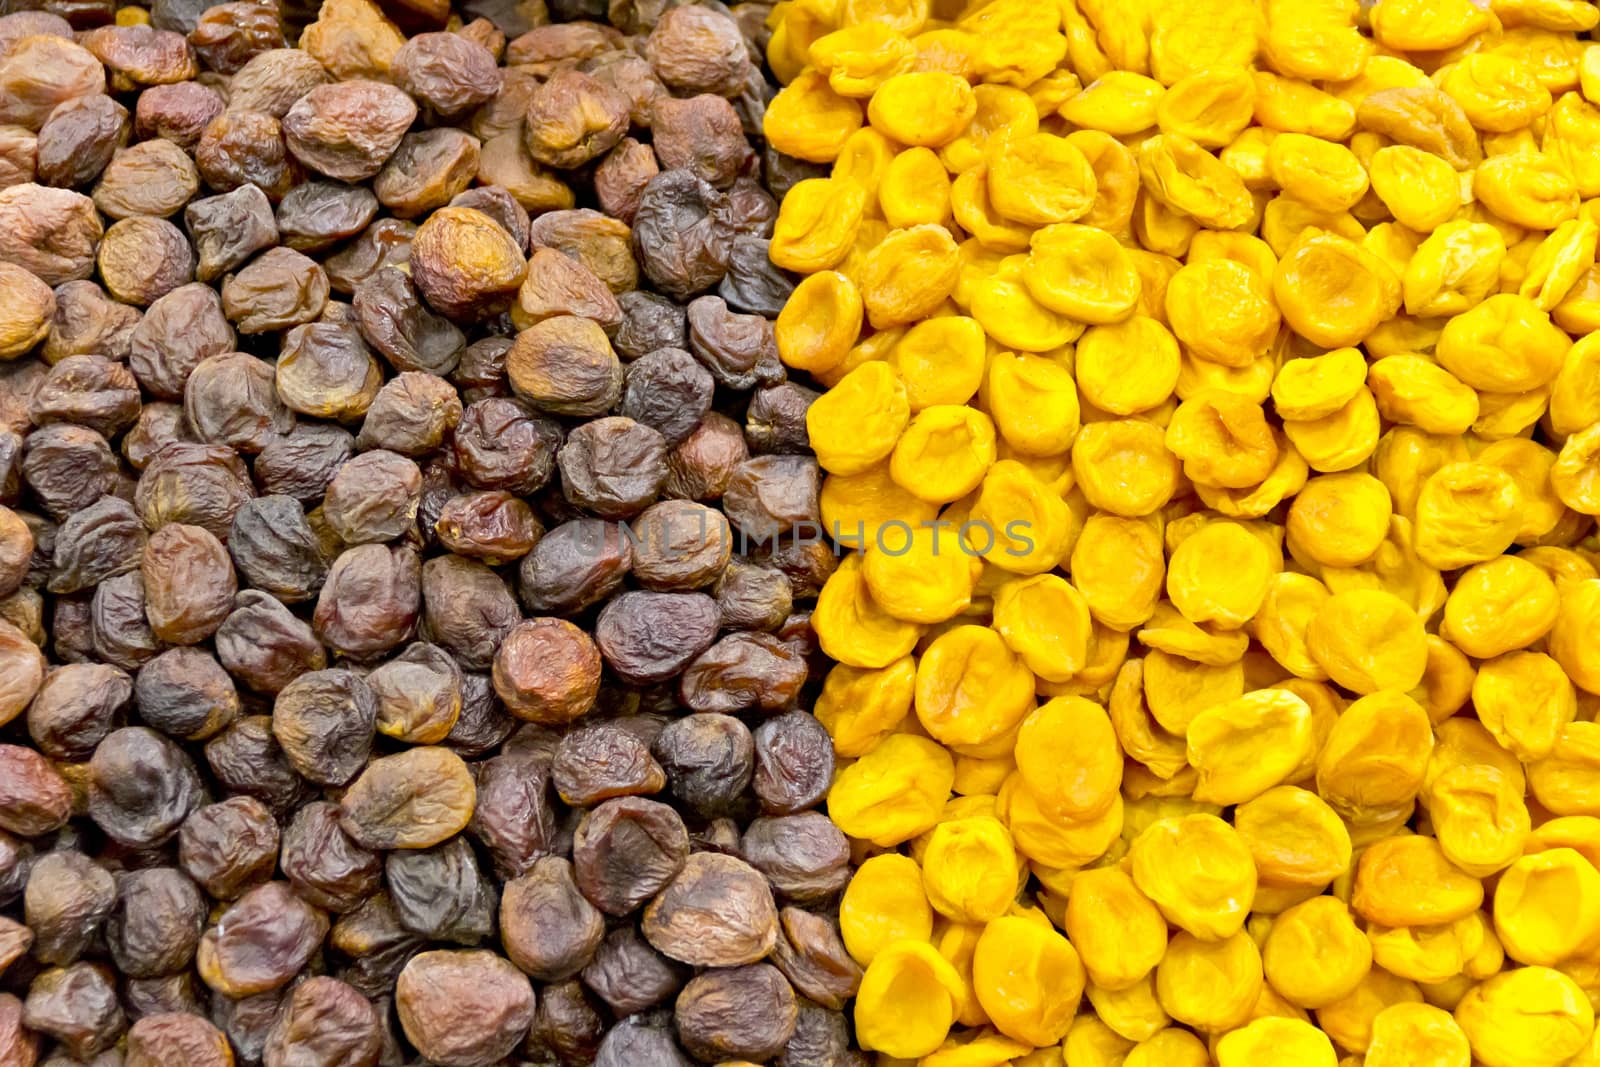 Background from colored oriental dry fruits in marketplace